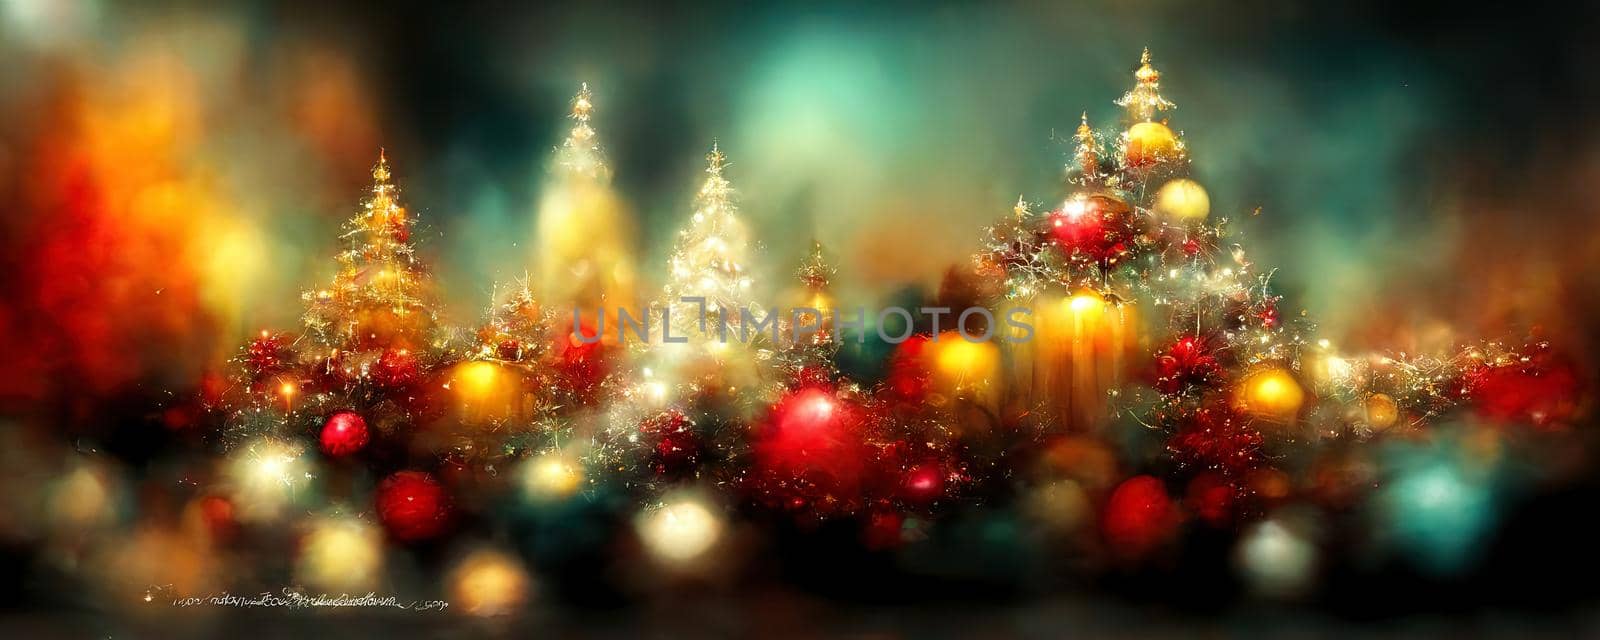 New Year's warm background with copy space in warm colors with Christmas decorations and Christmas tree branches.